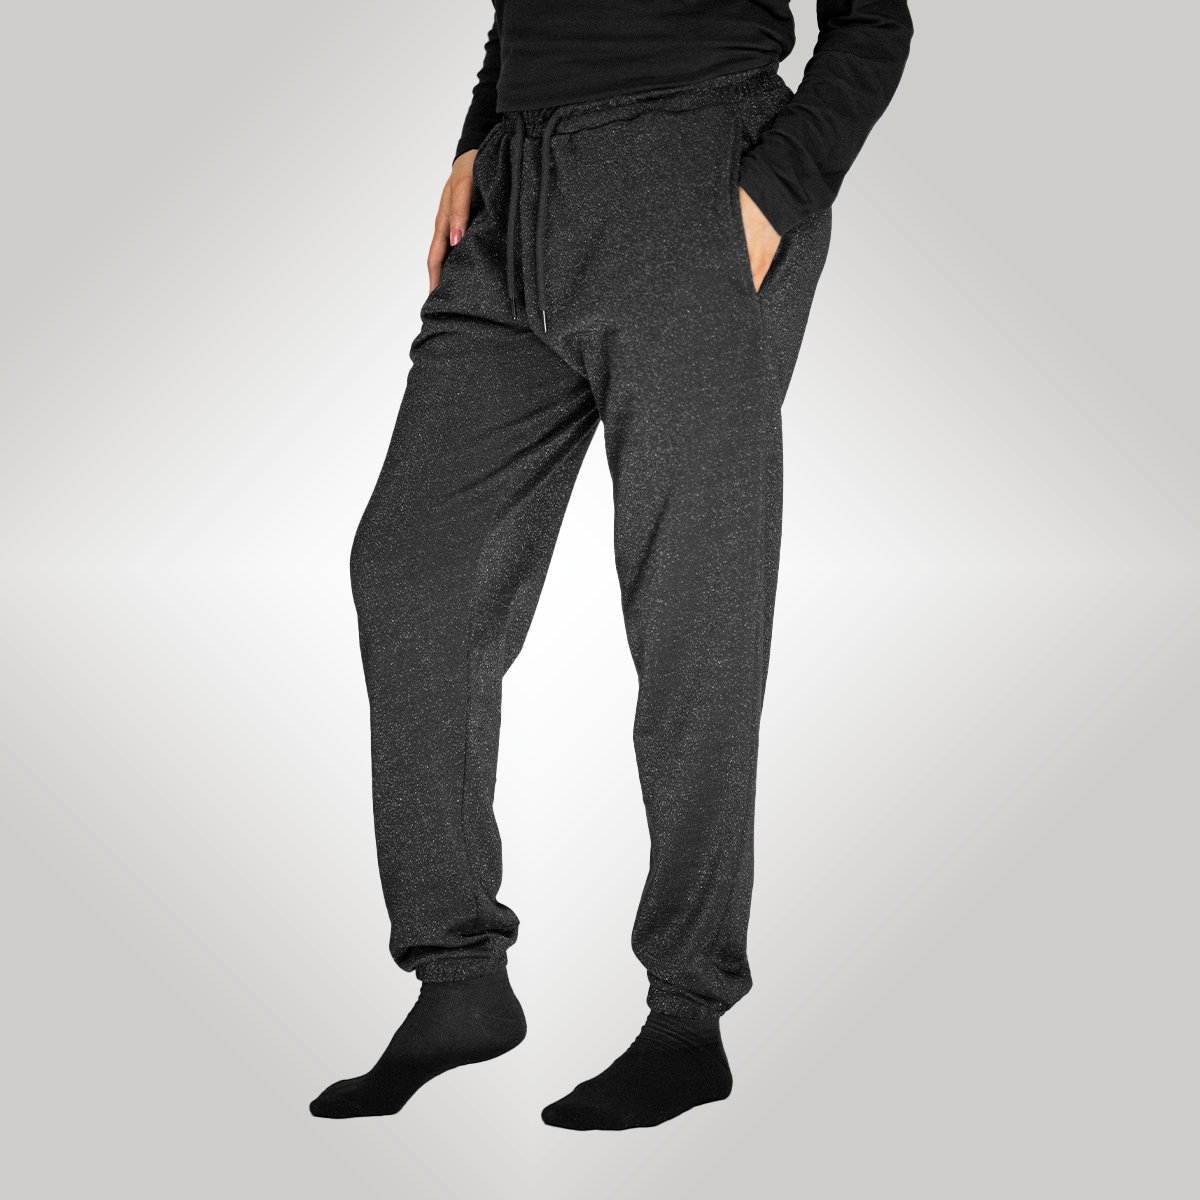 Cozy and Stylish Sparkly men's Terry Jogger Pants for Leisure